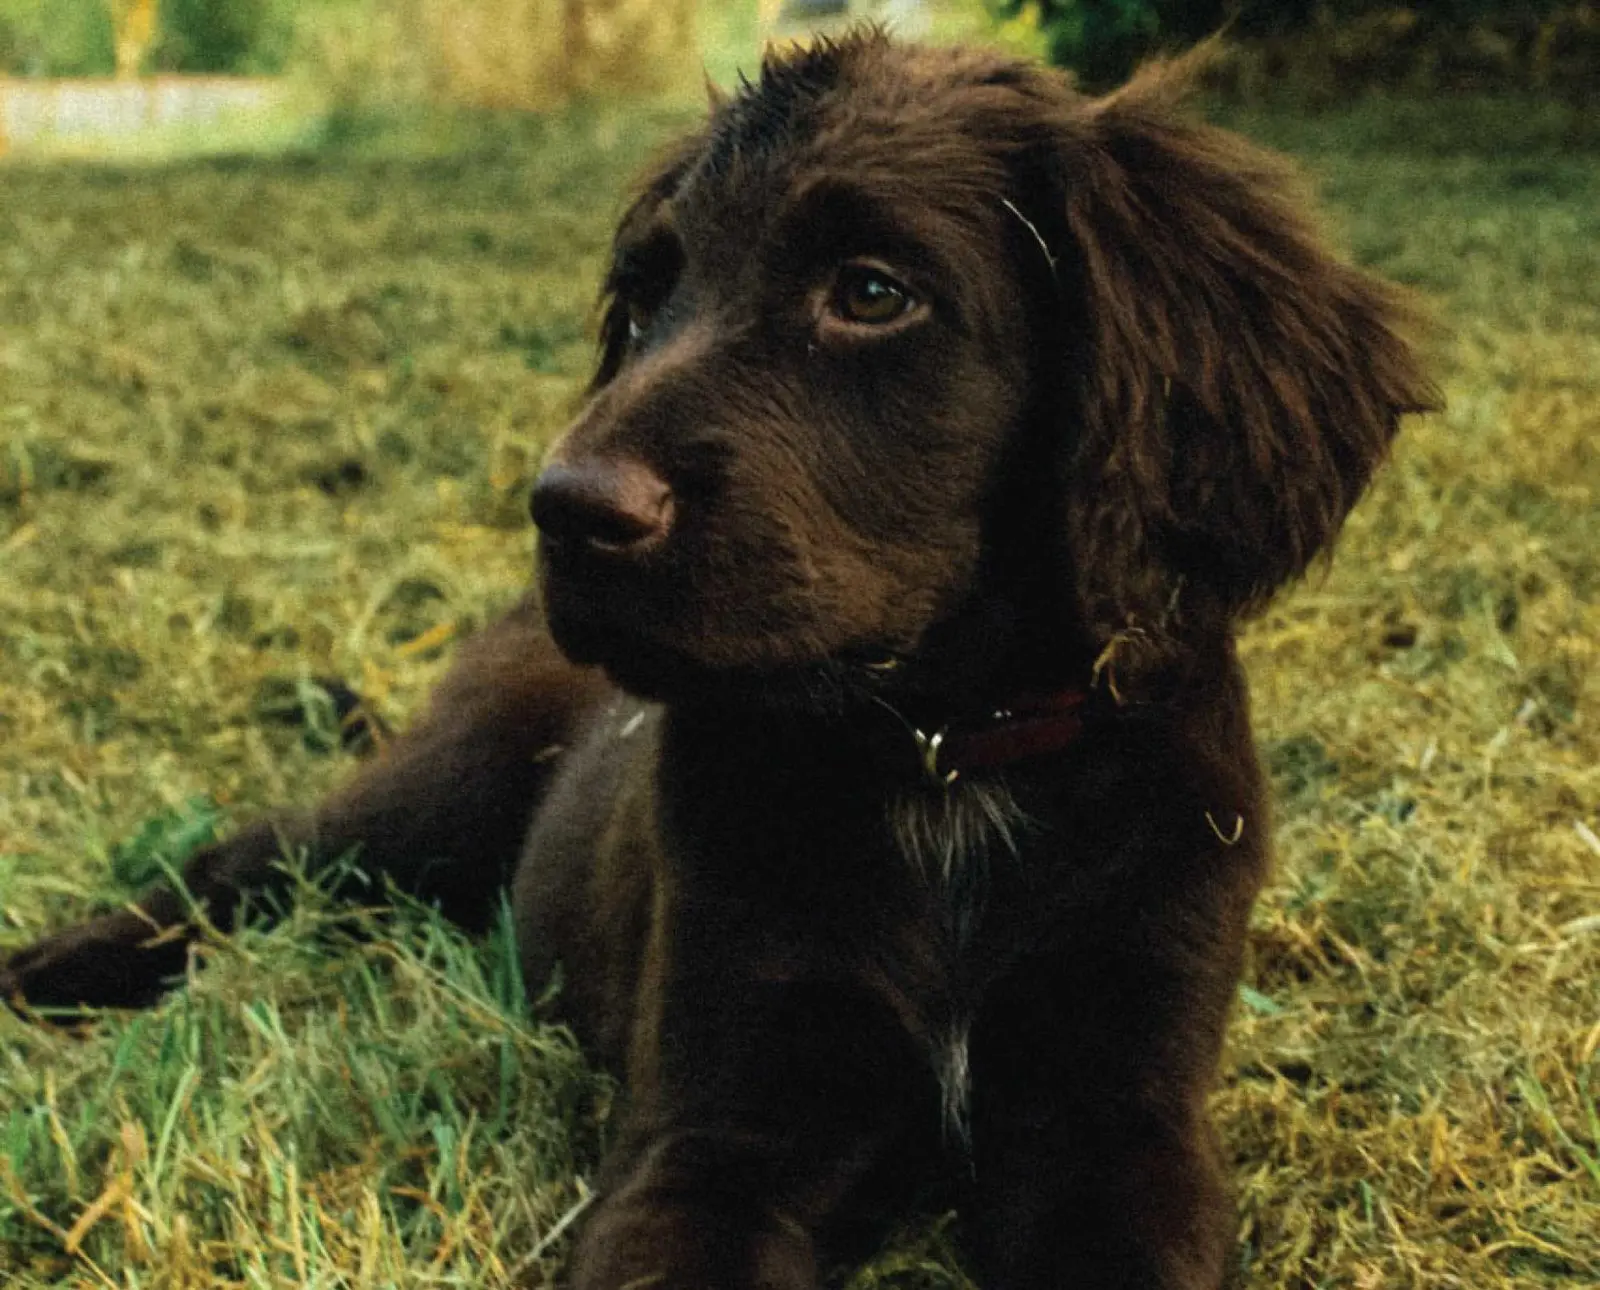 A bird dog puppy laying in the grass.